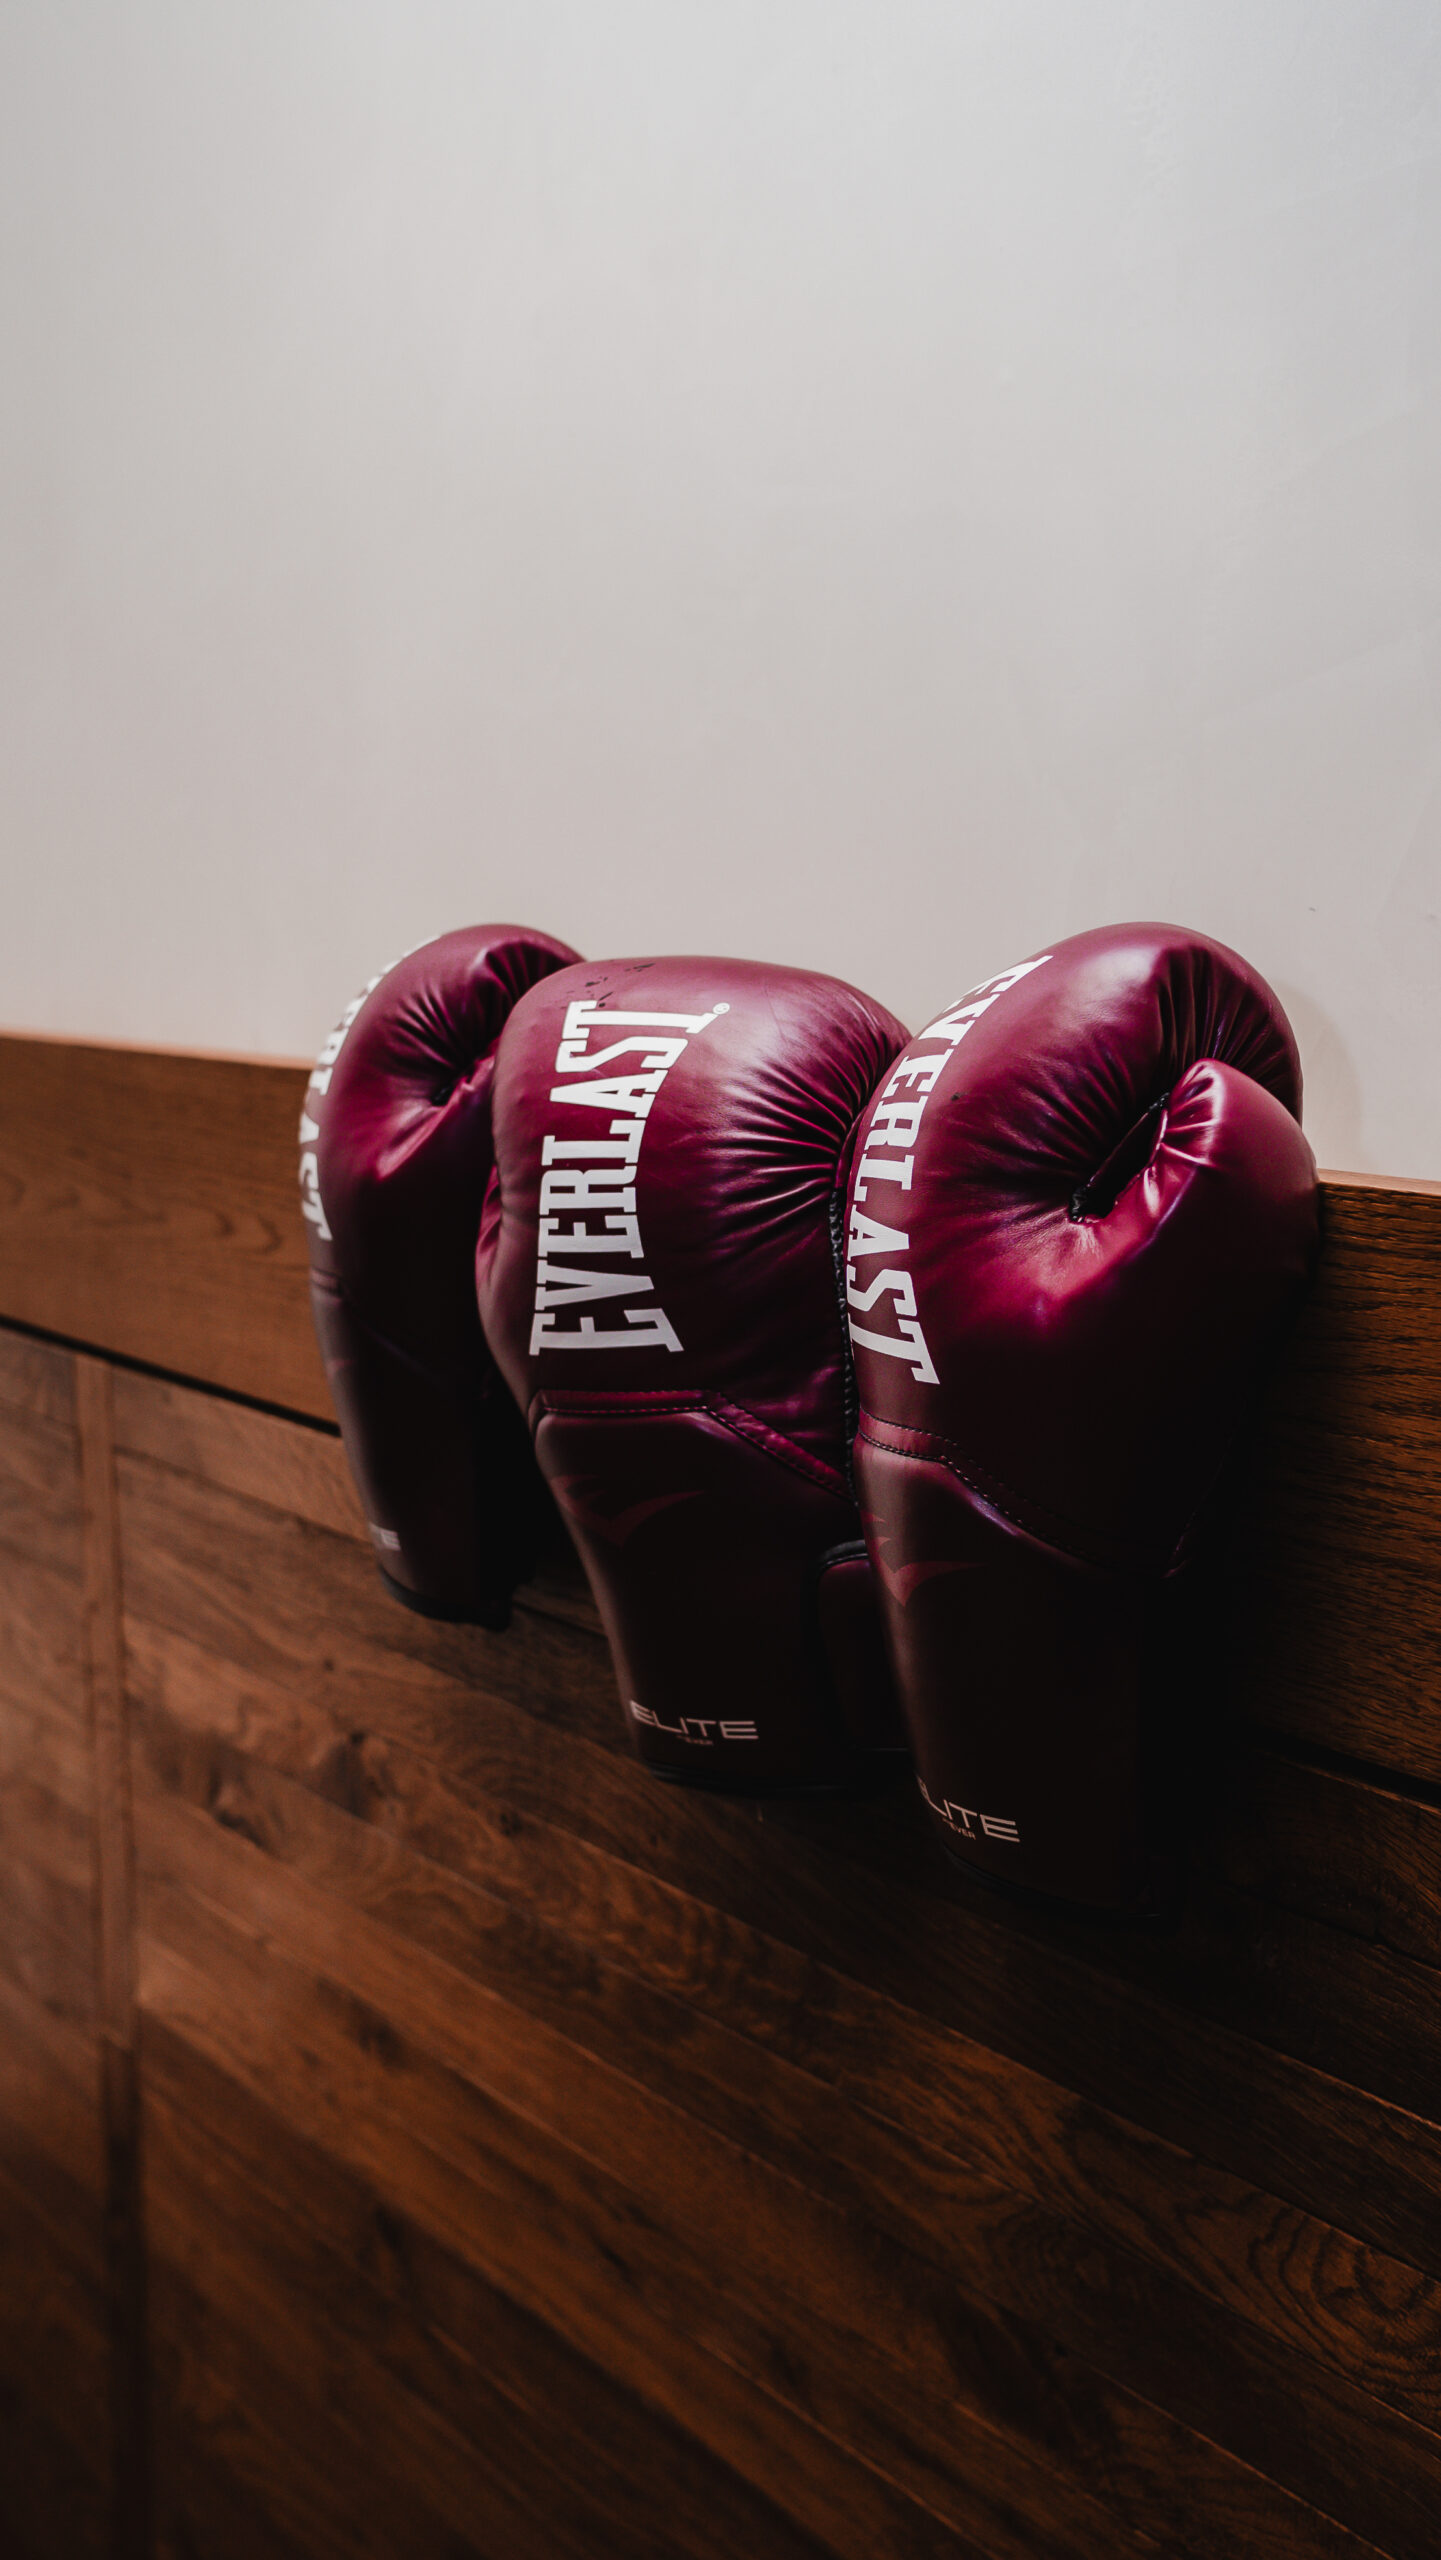 Boxing gloves in The Royal Hotel gym in Picton, Ontario